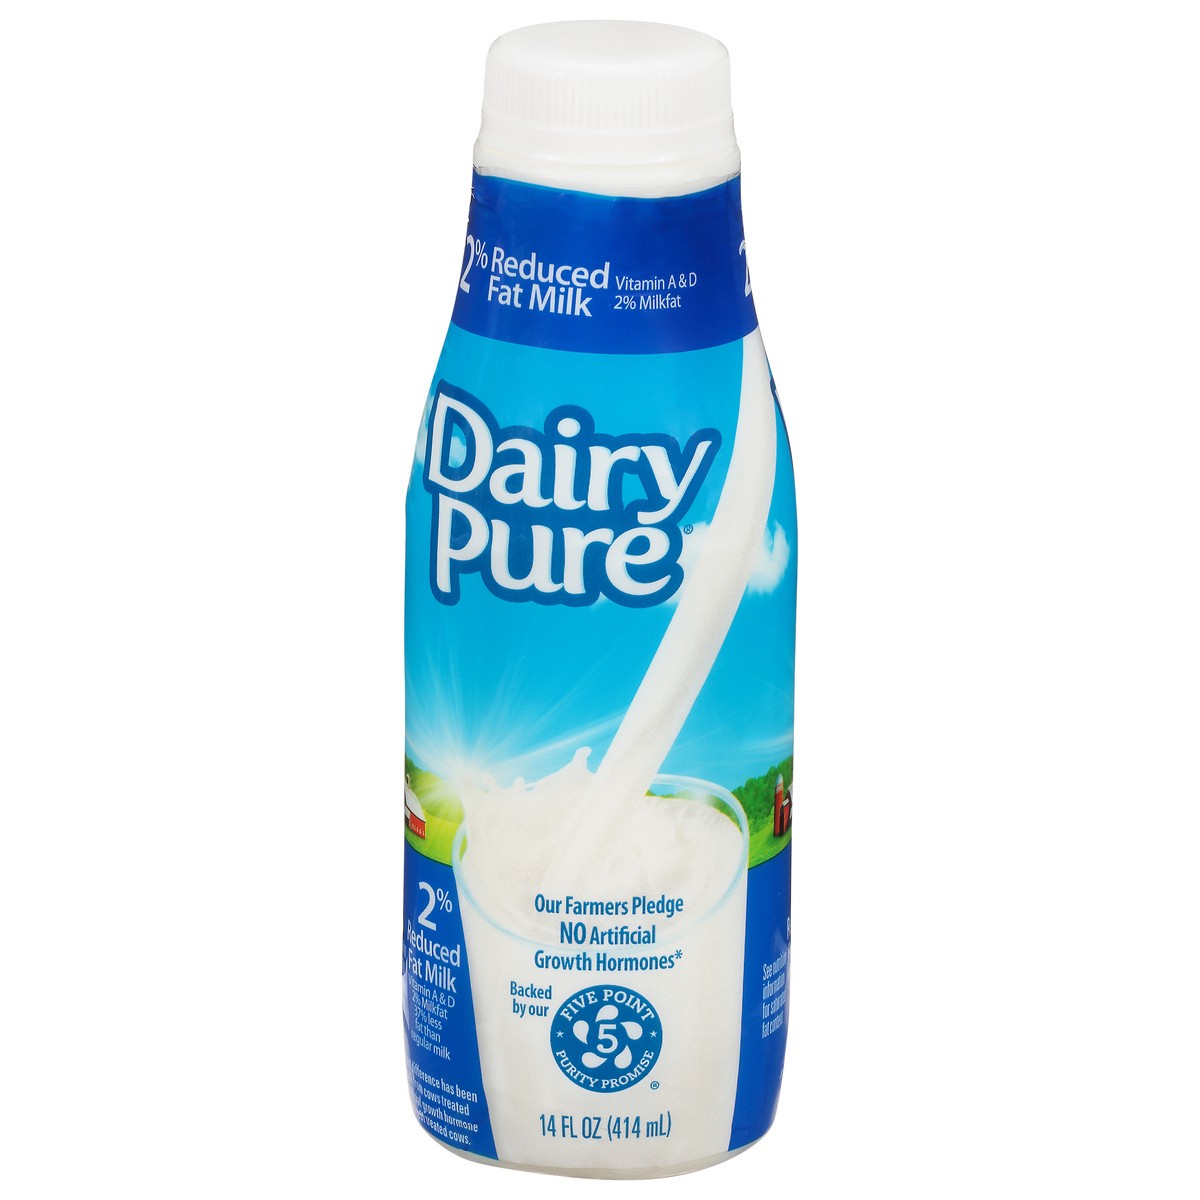 slide 10 of 12, Dairy Pure 2% Milk with Vitamin A and Vitamin D, Reduced Fat Milk Bottle - 14 Fl Oz, 14 fl oz